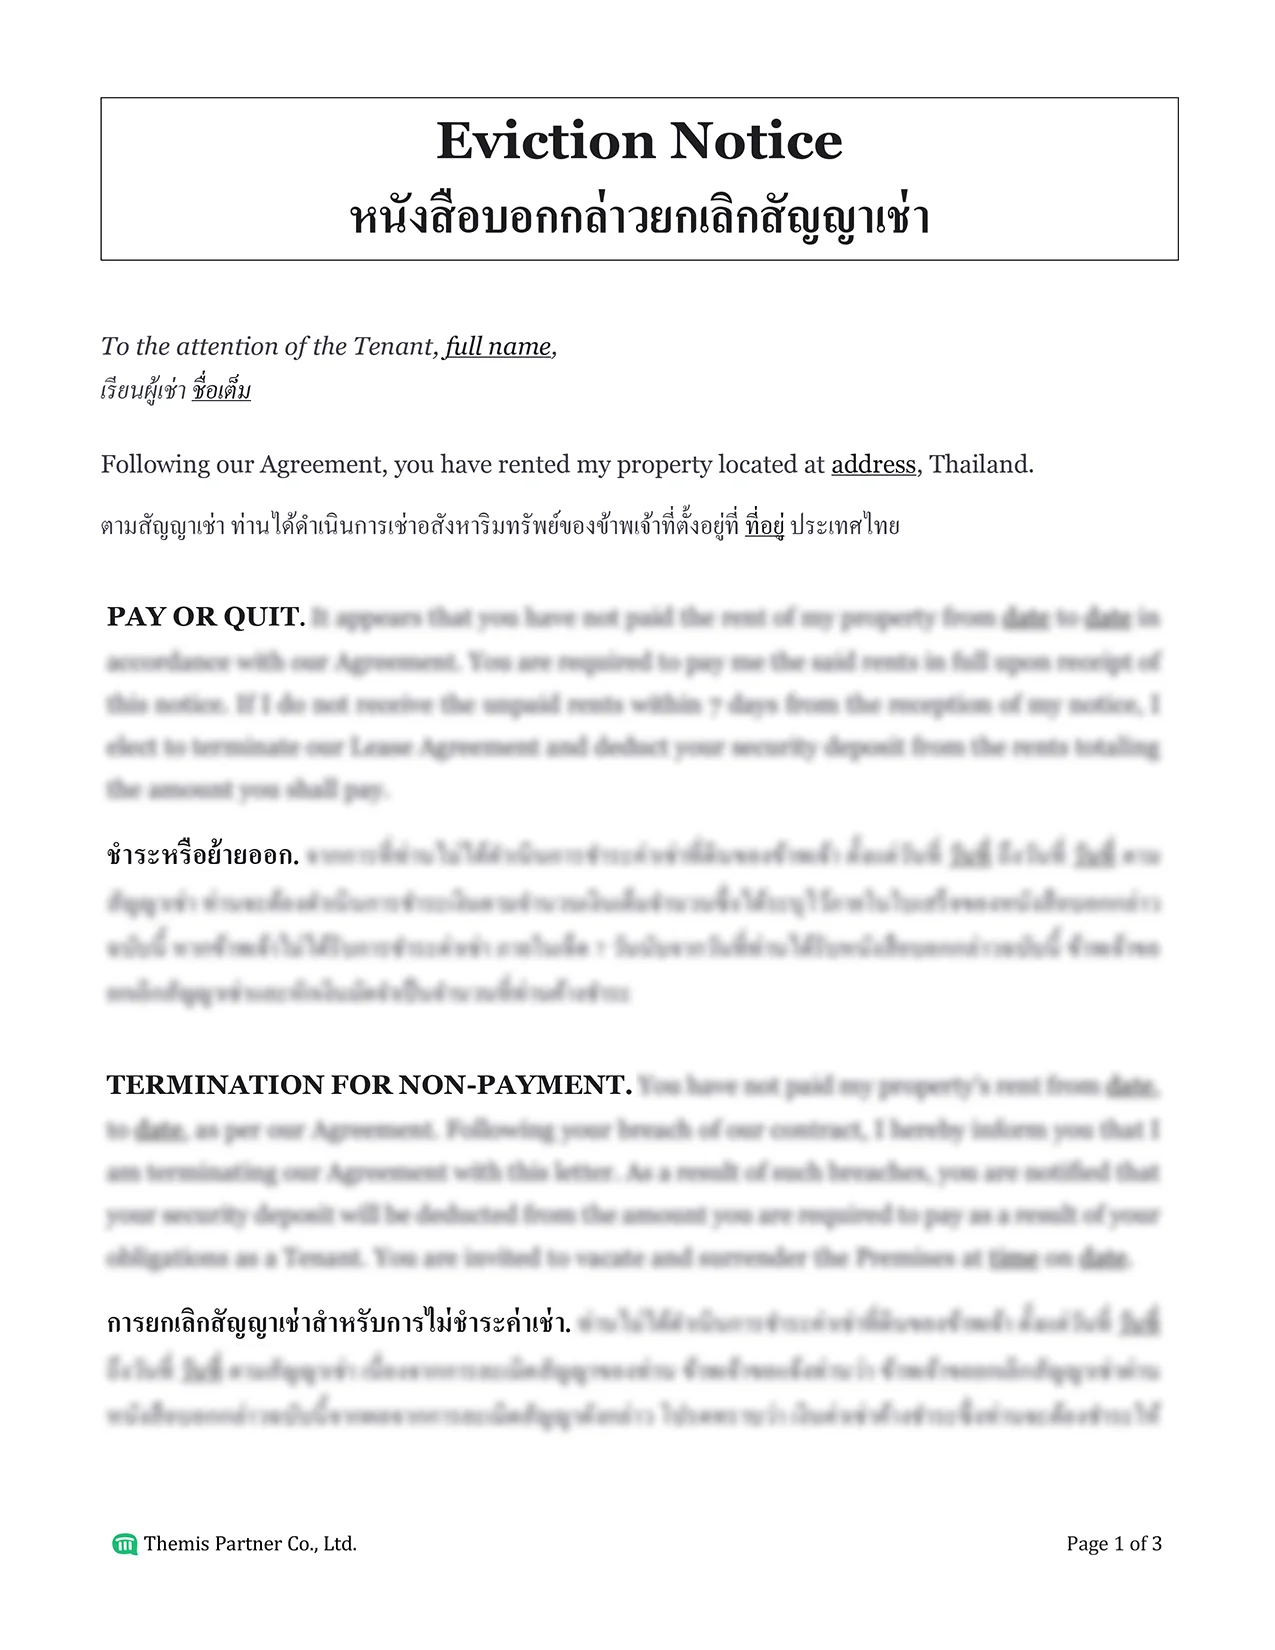 Eviction notice letter Thailand 1